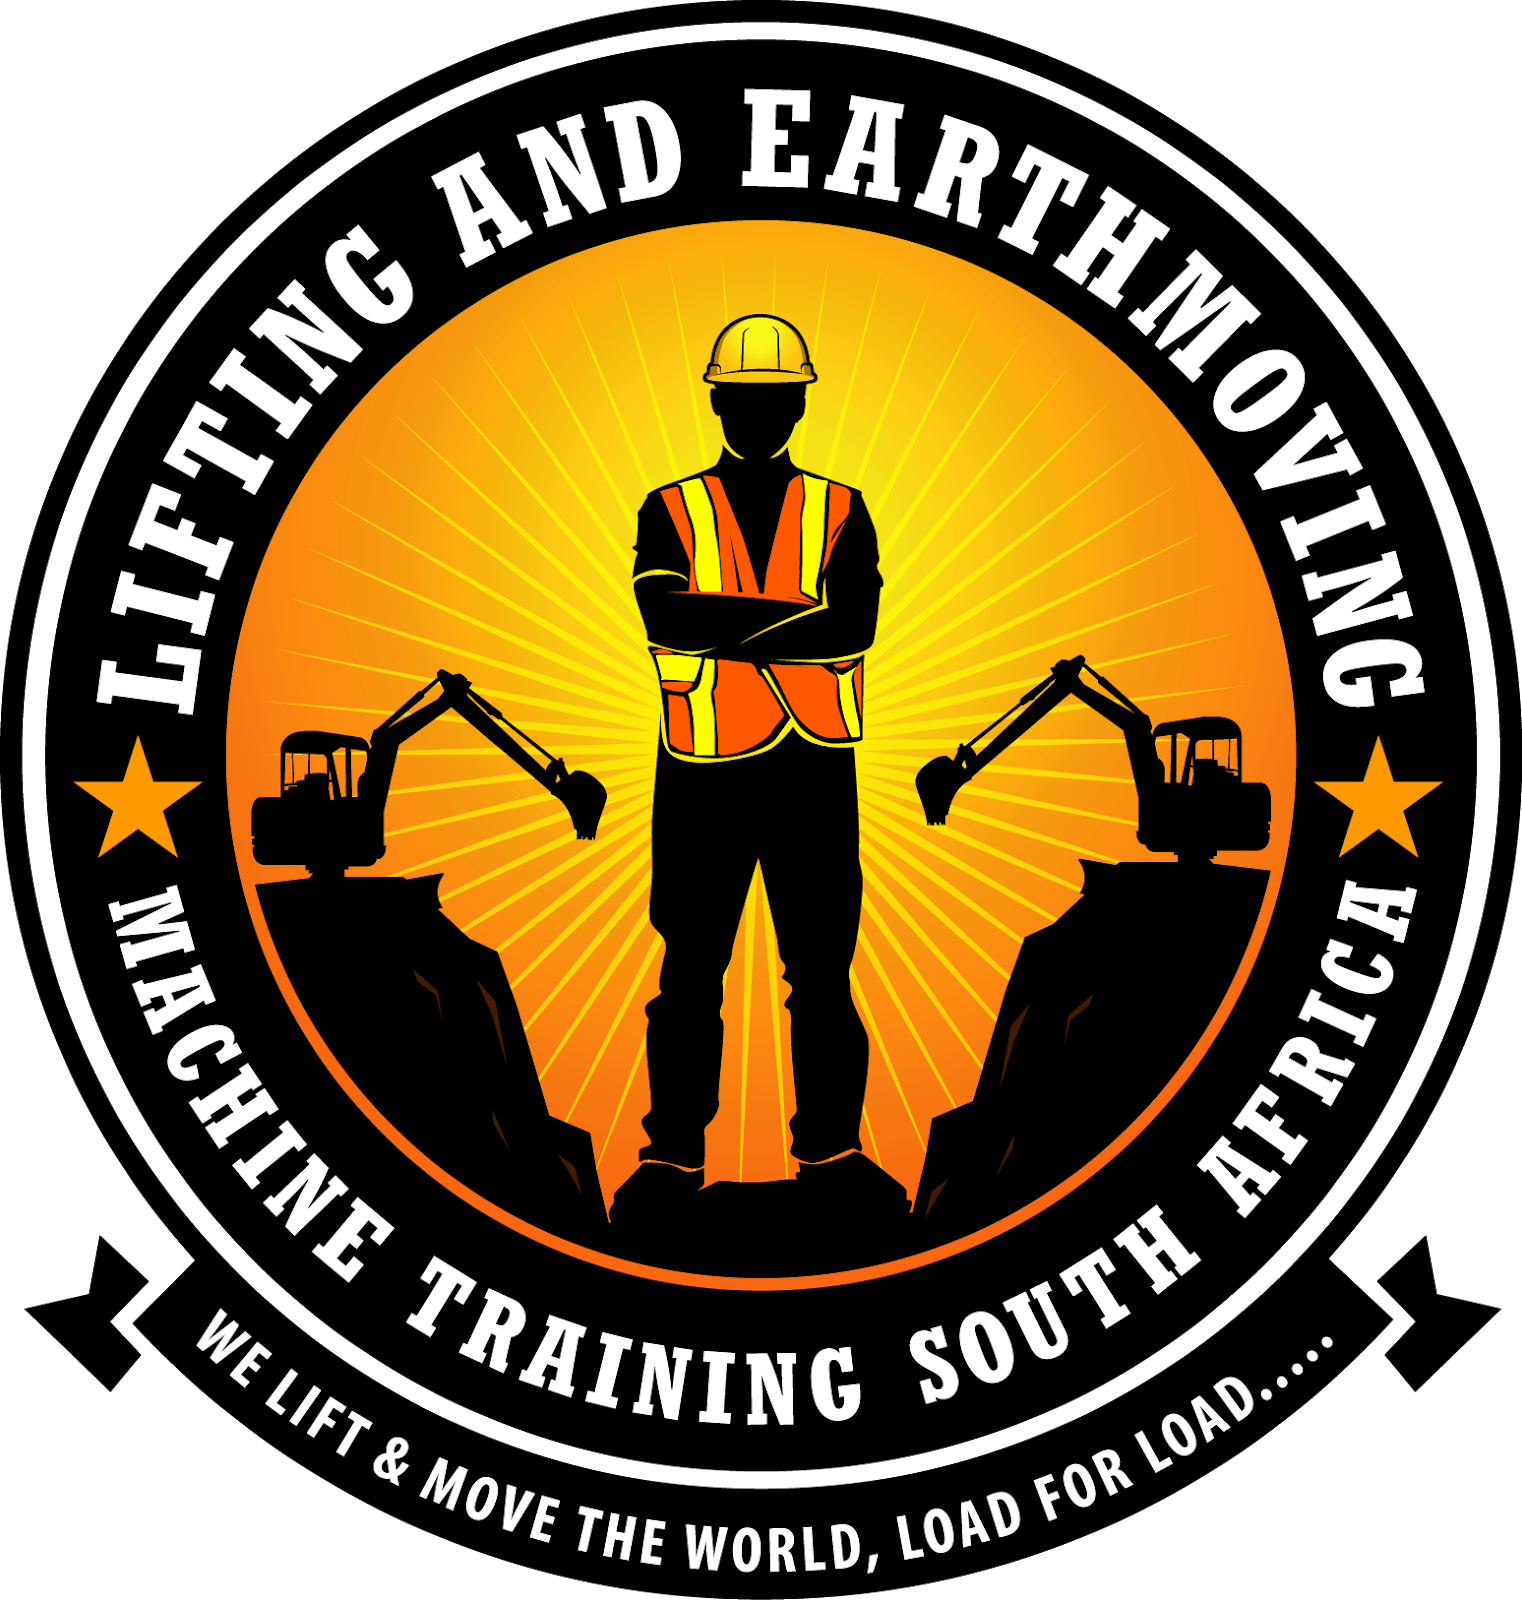 Lifting and Earthmoving Machine Training South Africa!